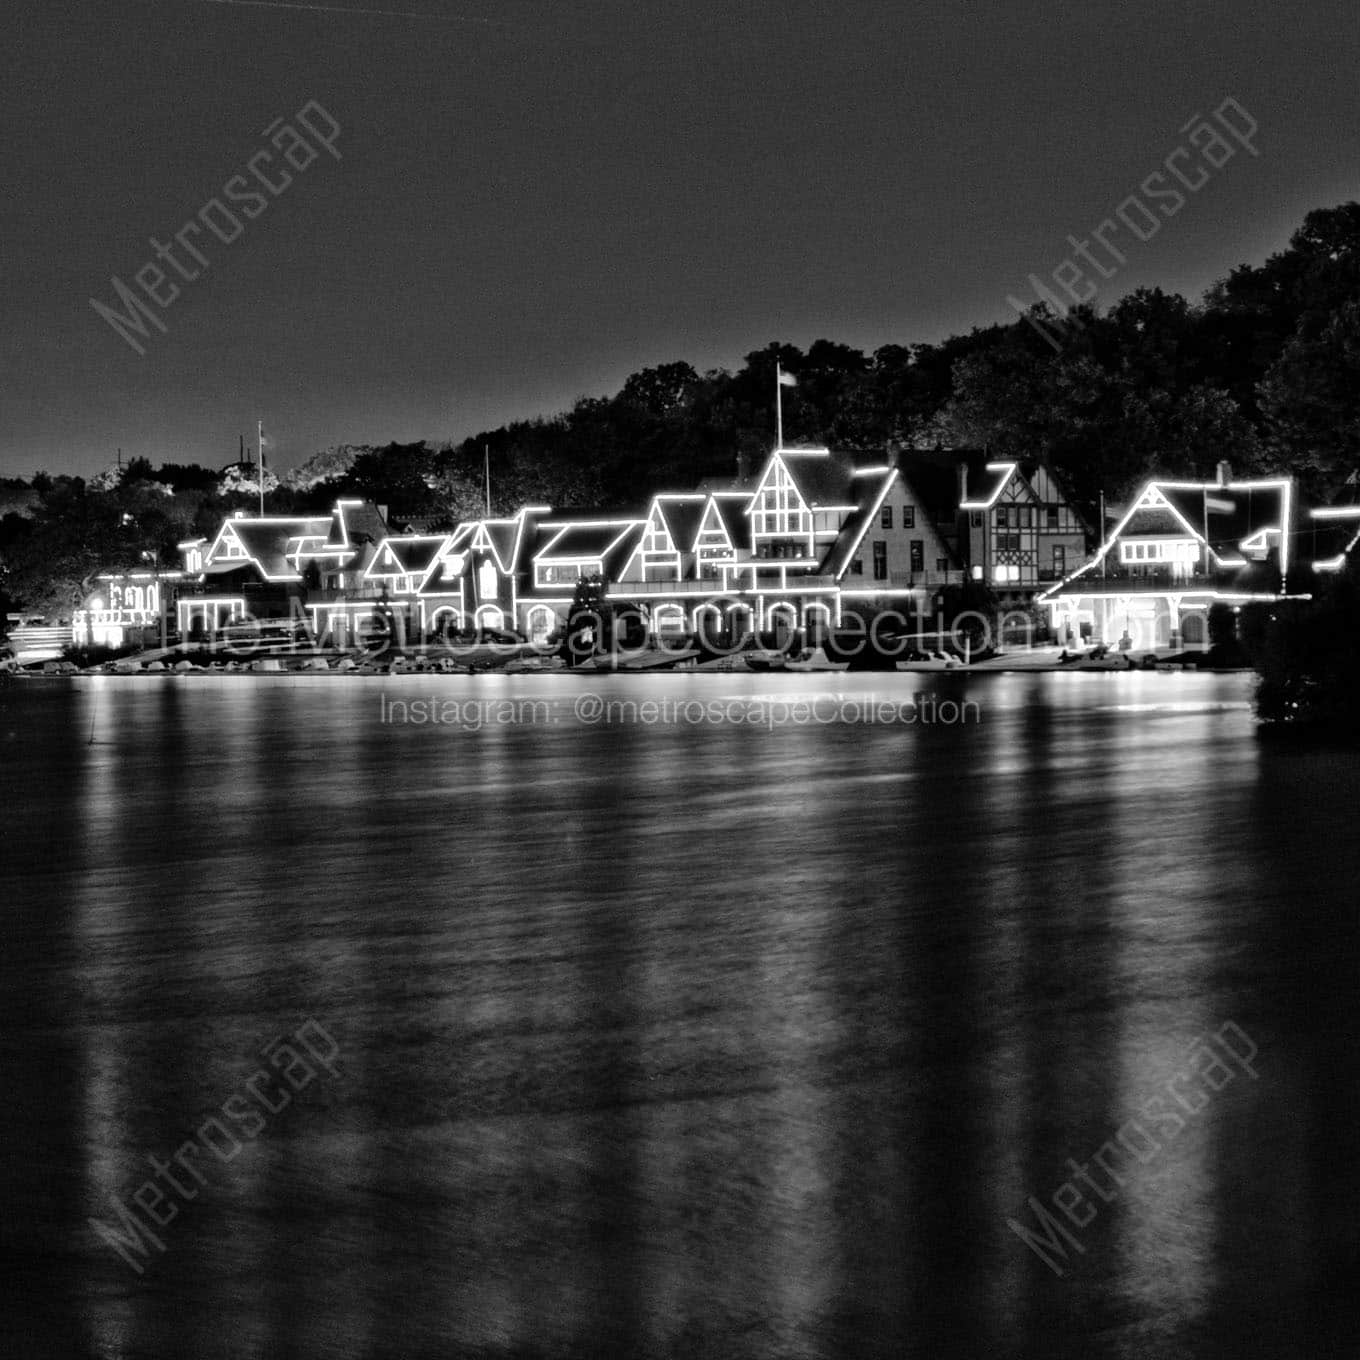 boathouse row on schuylkill river at night Black & White Office Art